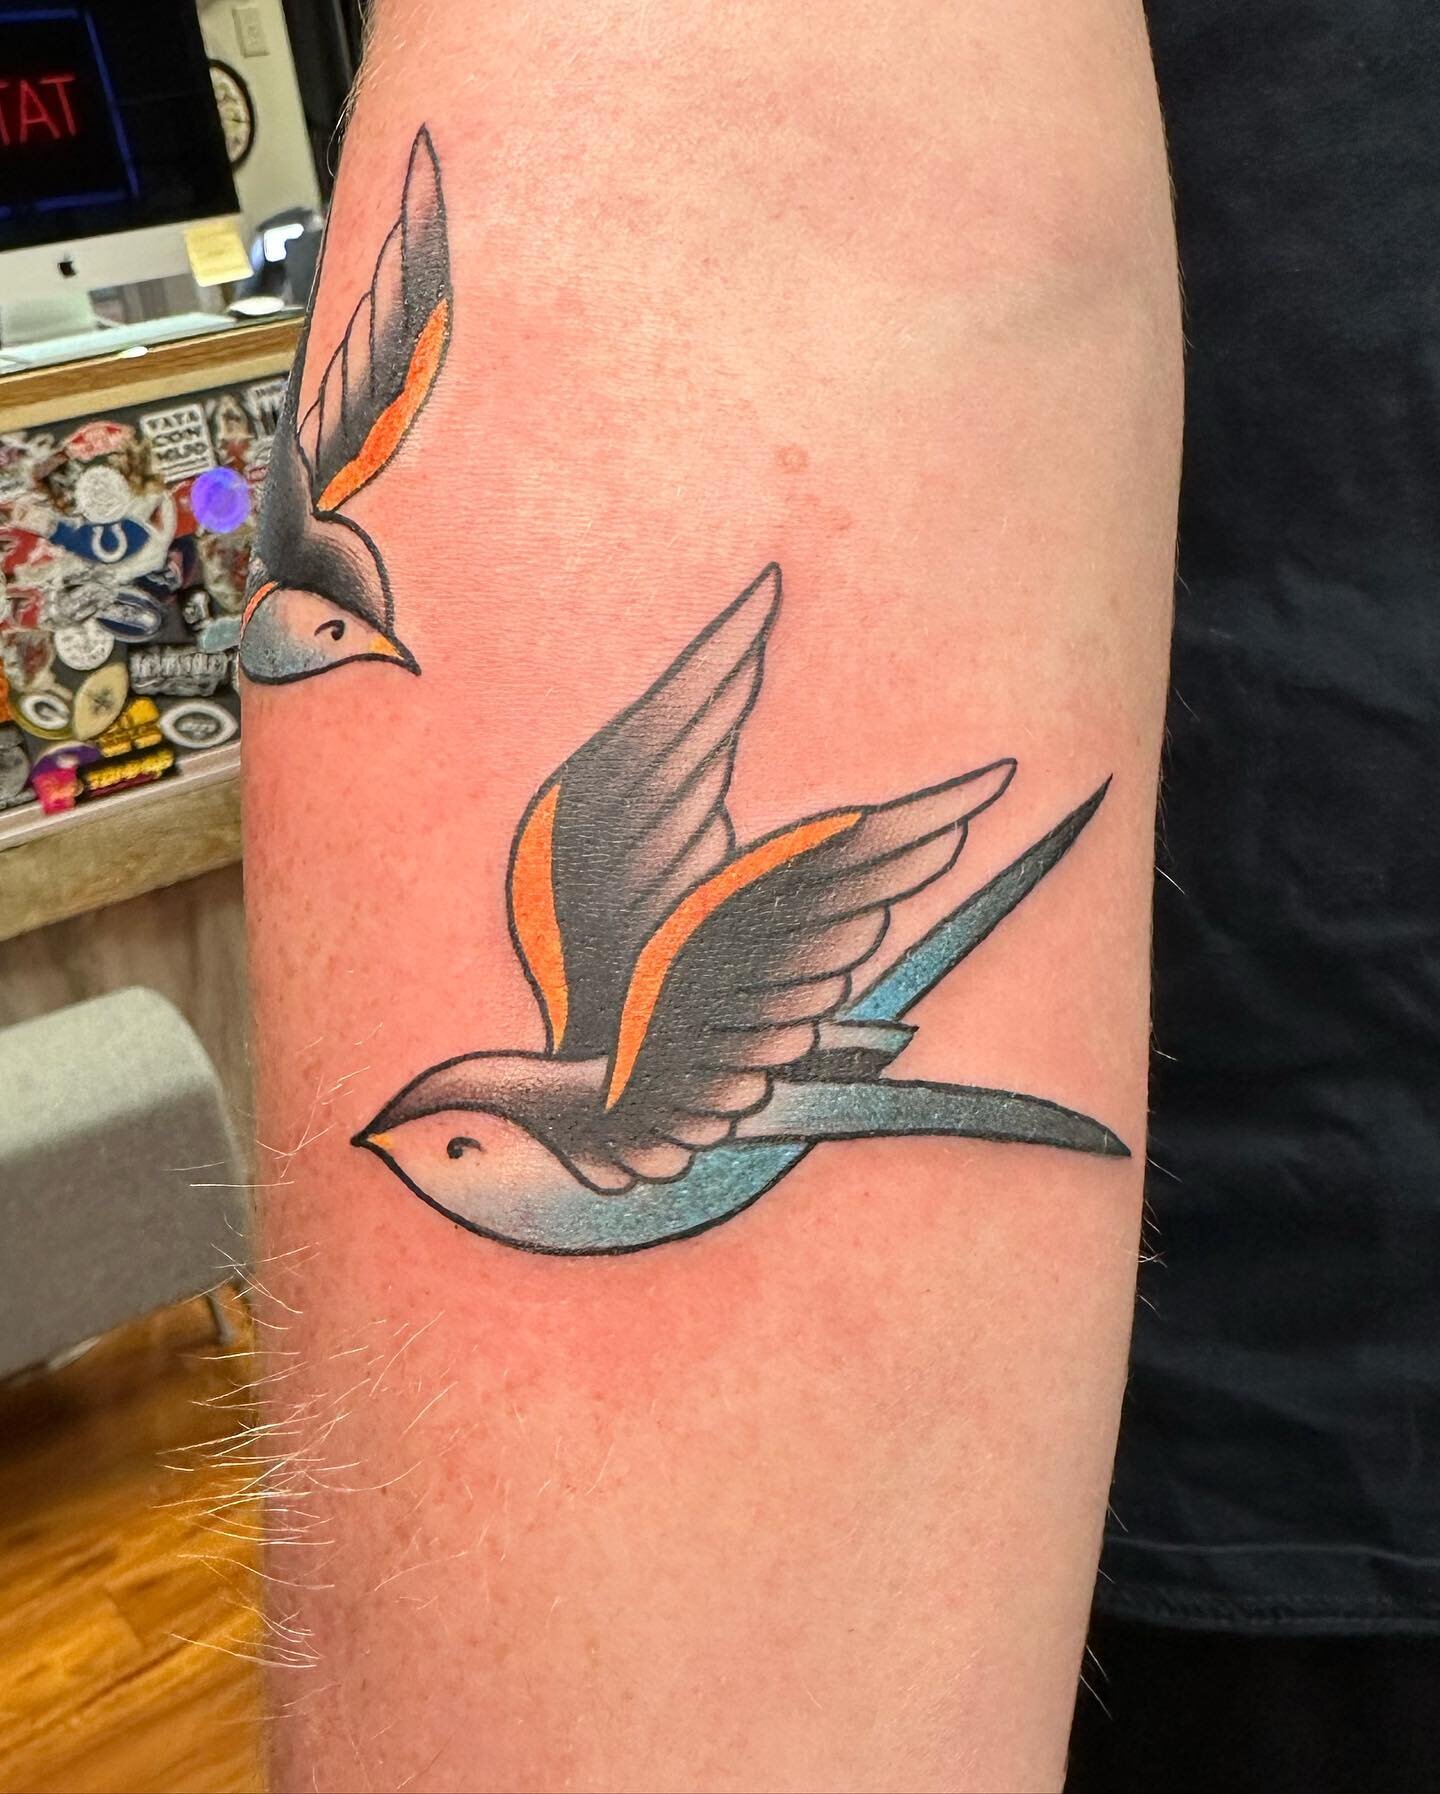 Did a couple #traditionaltattoo #swallows the other day. Fun, simple designs that are timeless.
.
.
.
.
#tattoo #birdtattoo #traditionaltattoos #colortattoo #cleanlinesboldcolor #boldwillhold